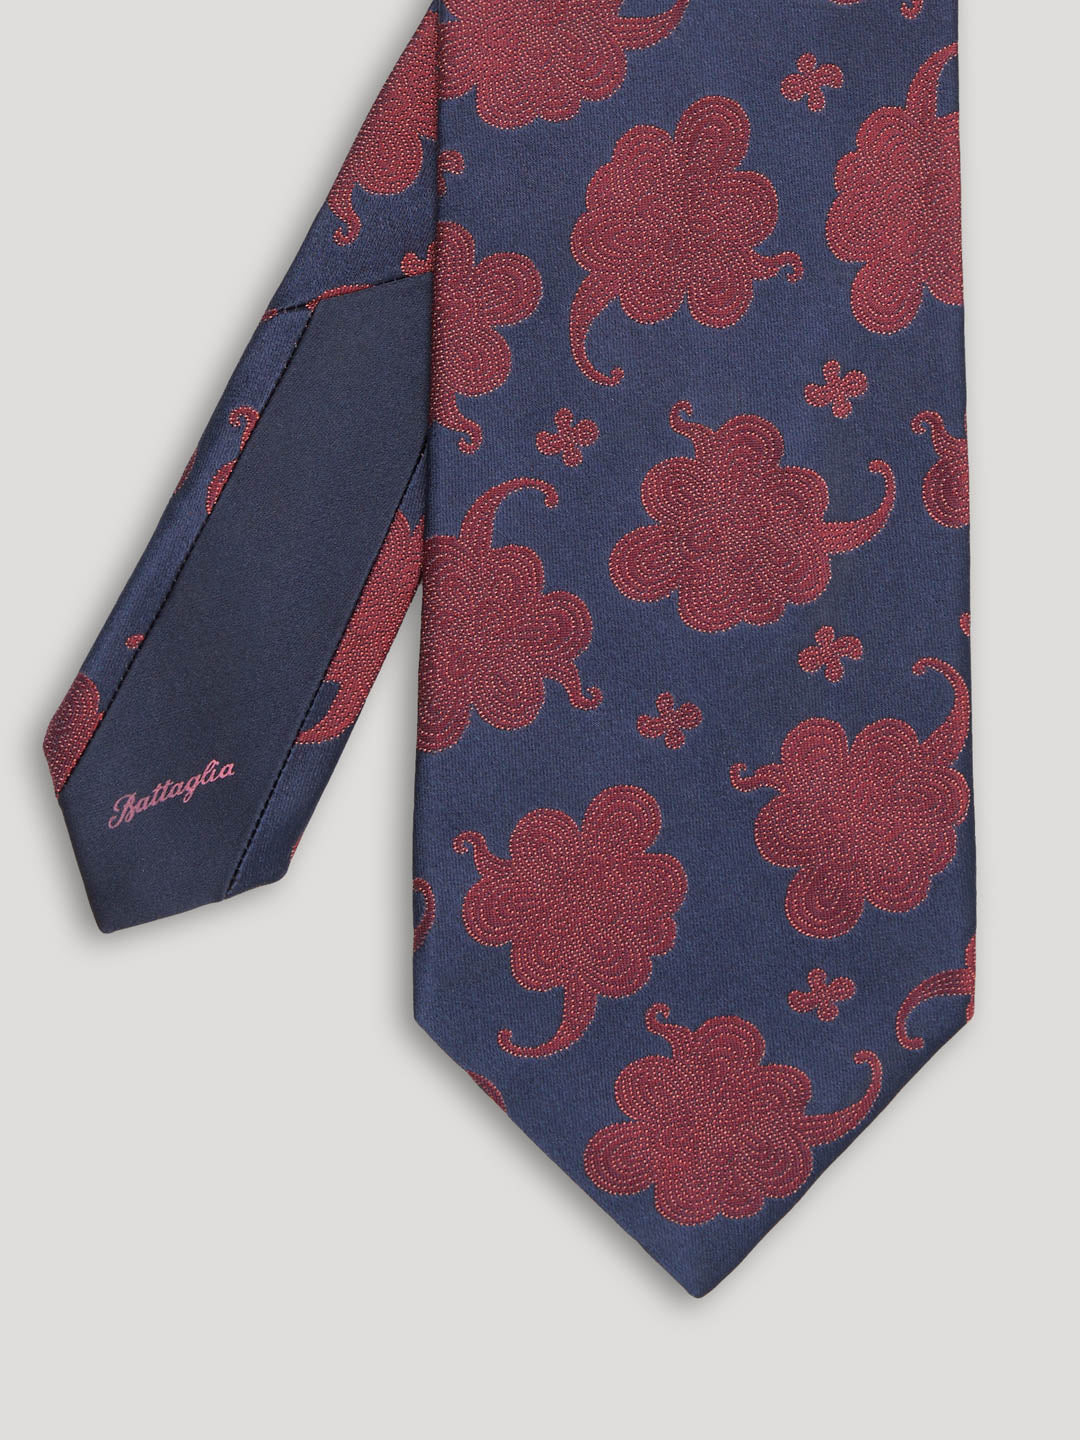 Navy and red paisley tie.  